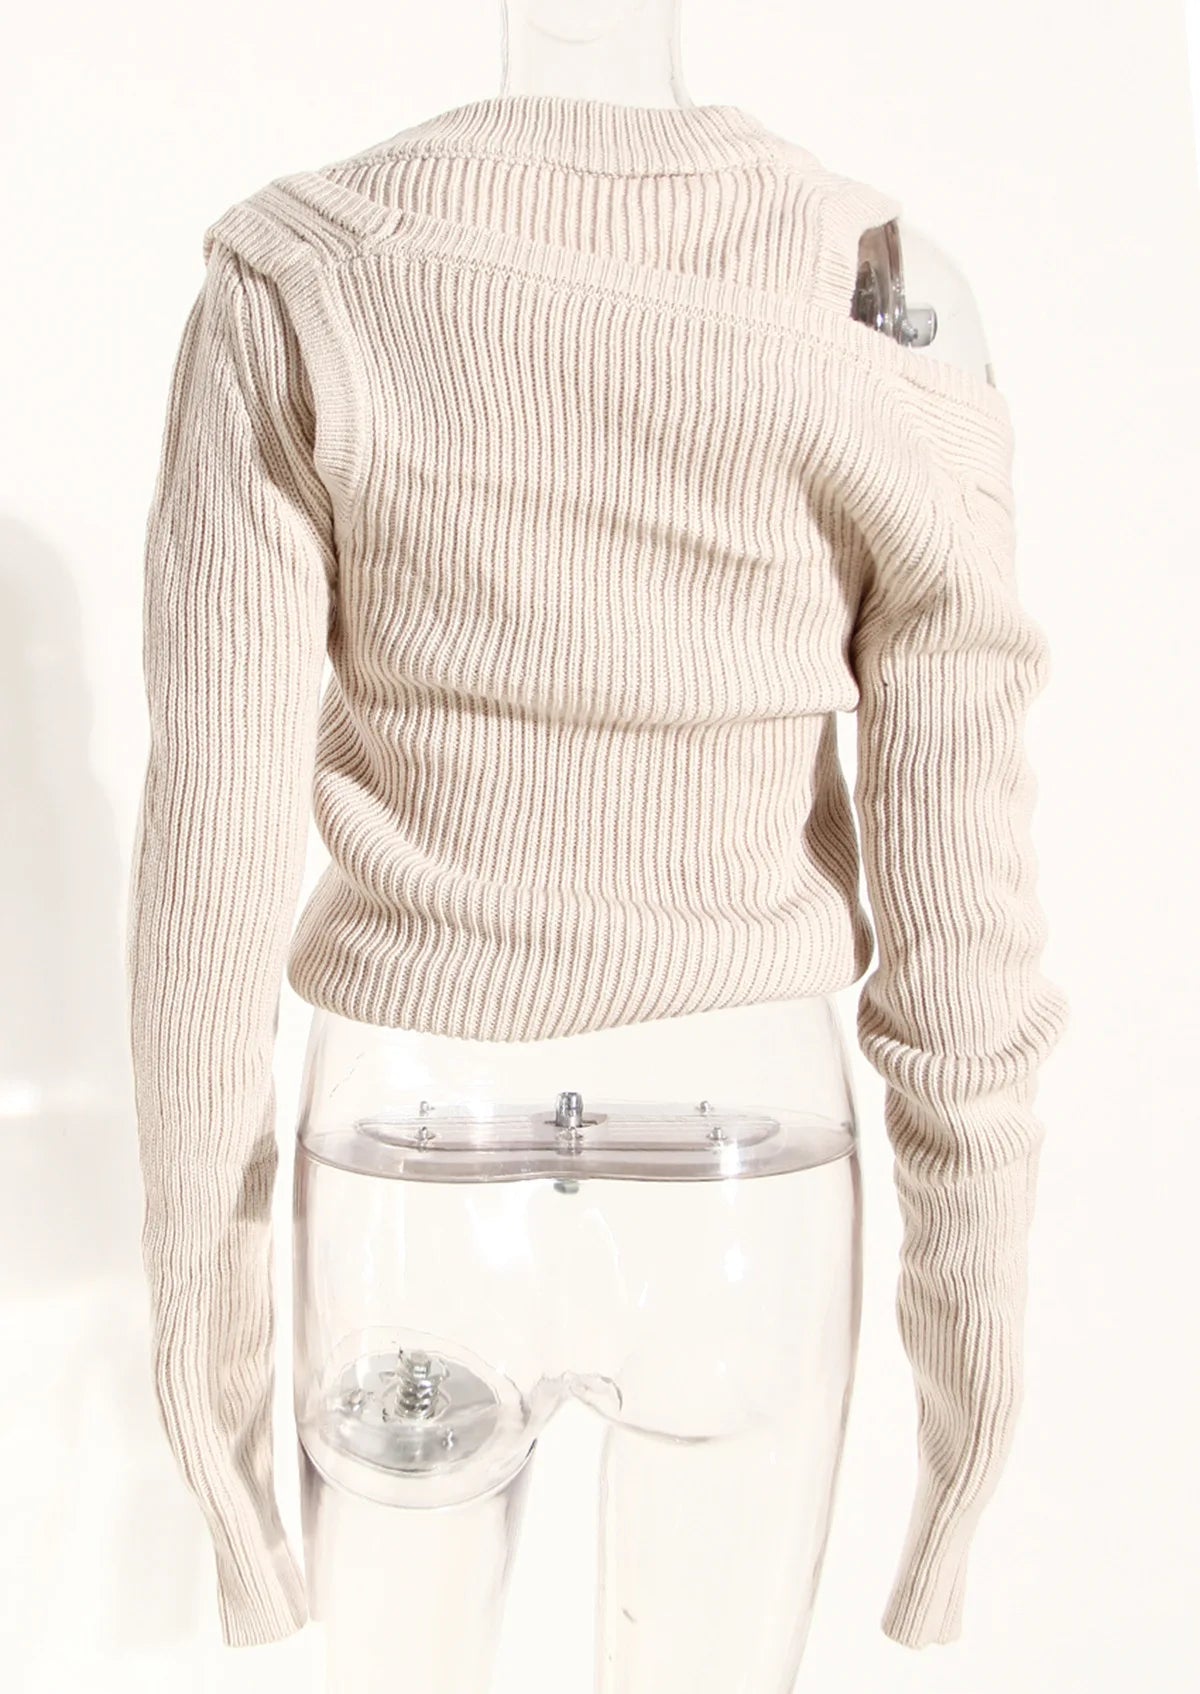 Deconstructed Layered Knit Sweater - Kelly Obi New York